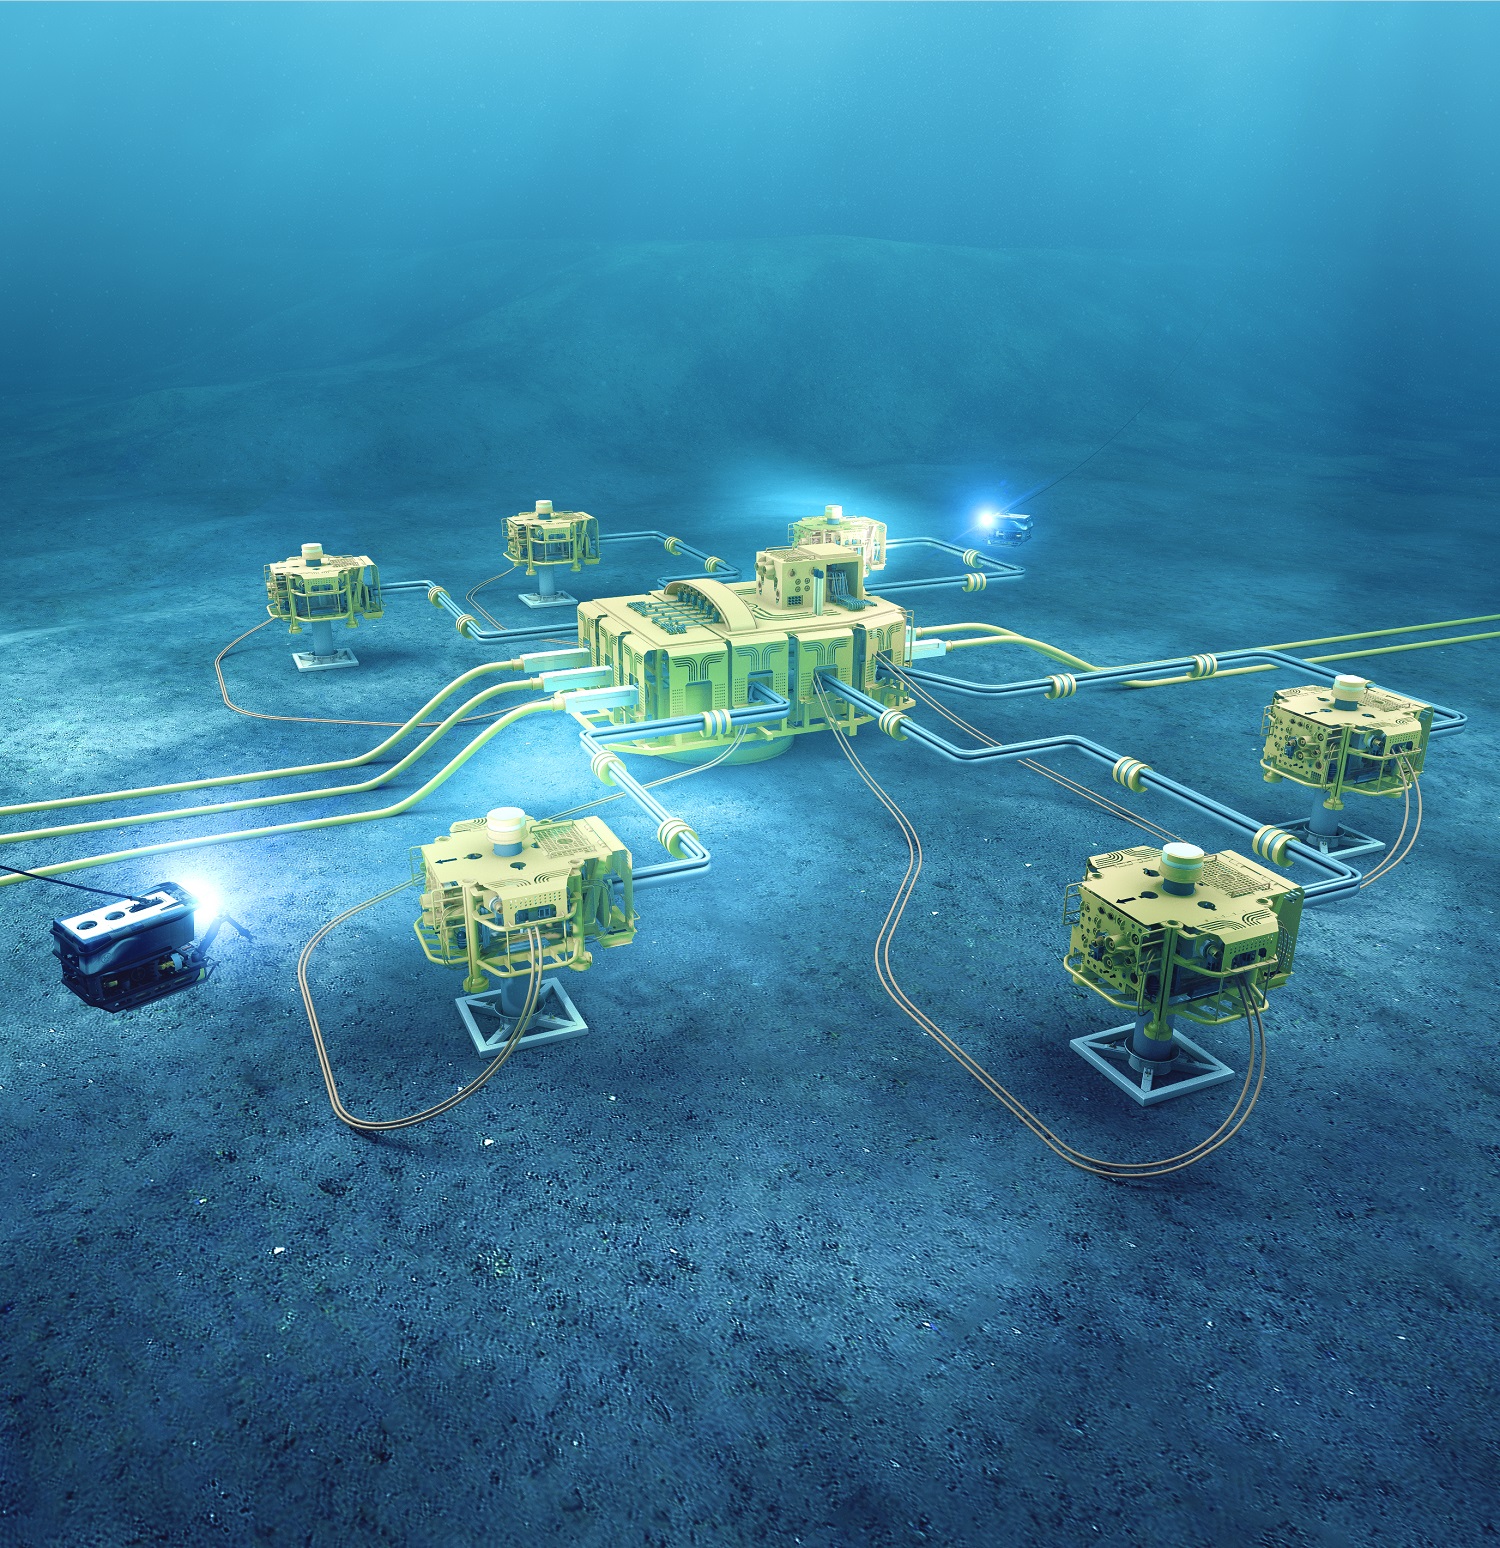 Adopting energy efficient subsea processing systems brings lower emissions and the decarbonisation of processes.